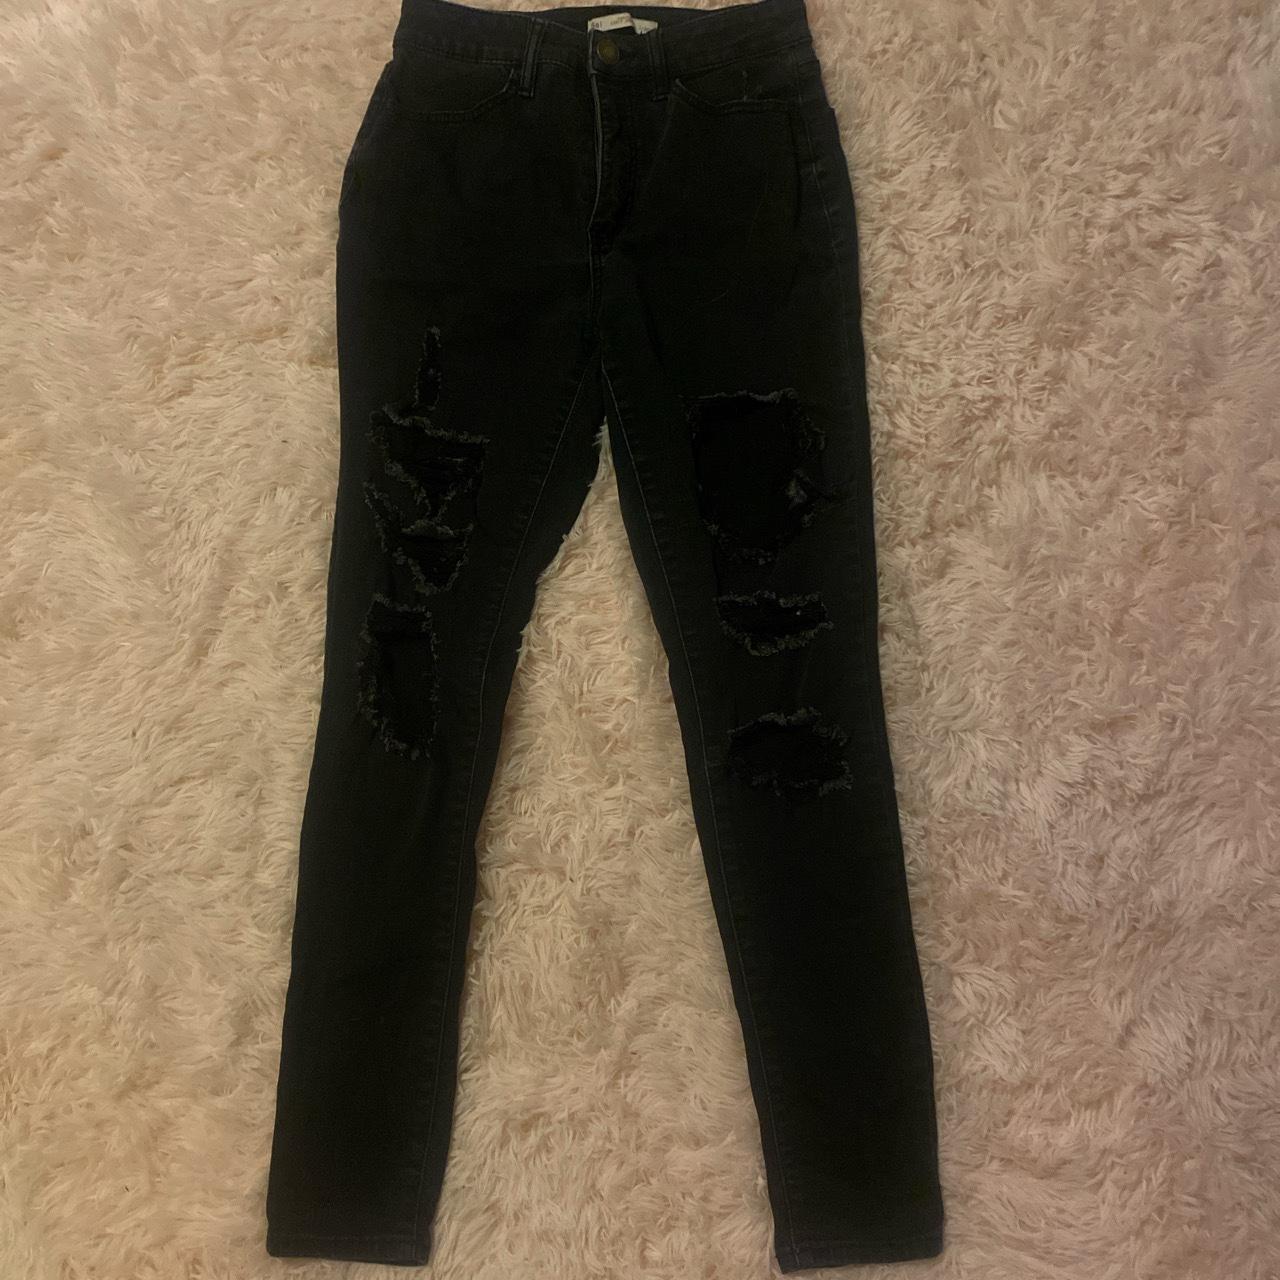 HOT* Kohl's Sonoma Women's Jeans as low as $12.74!